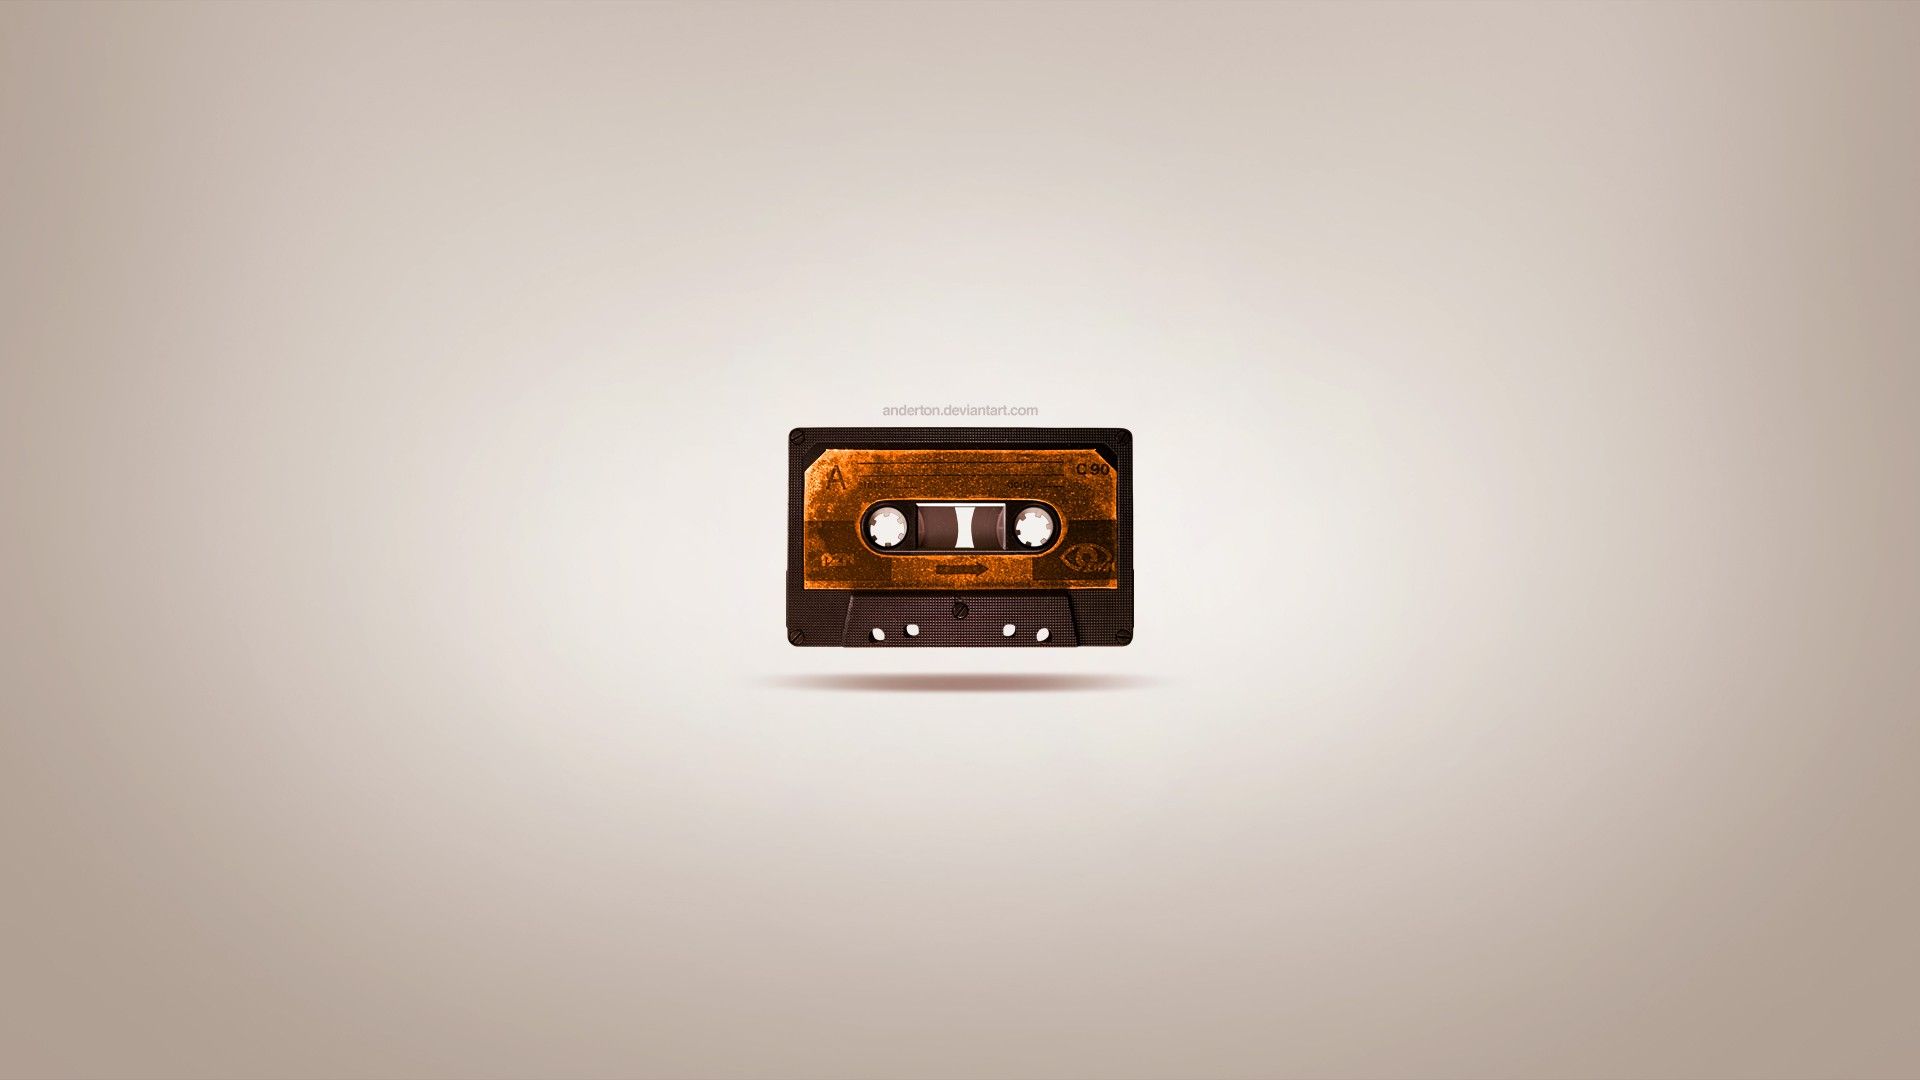 Audio Tape Wallpaper. Tape Wallpaper, Mixtape Background Graphics and Guardians of the Galaxy Tape Deck Wallpaper